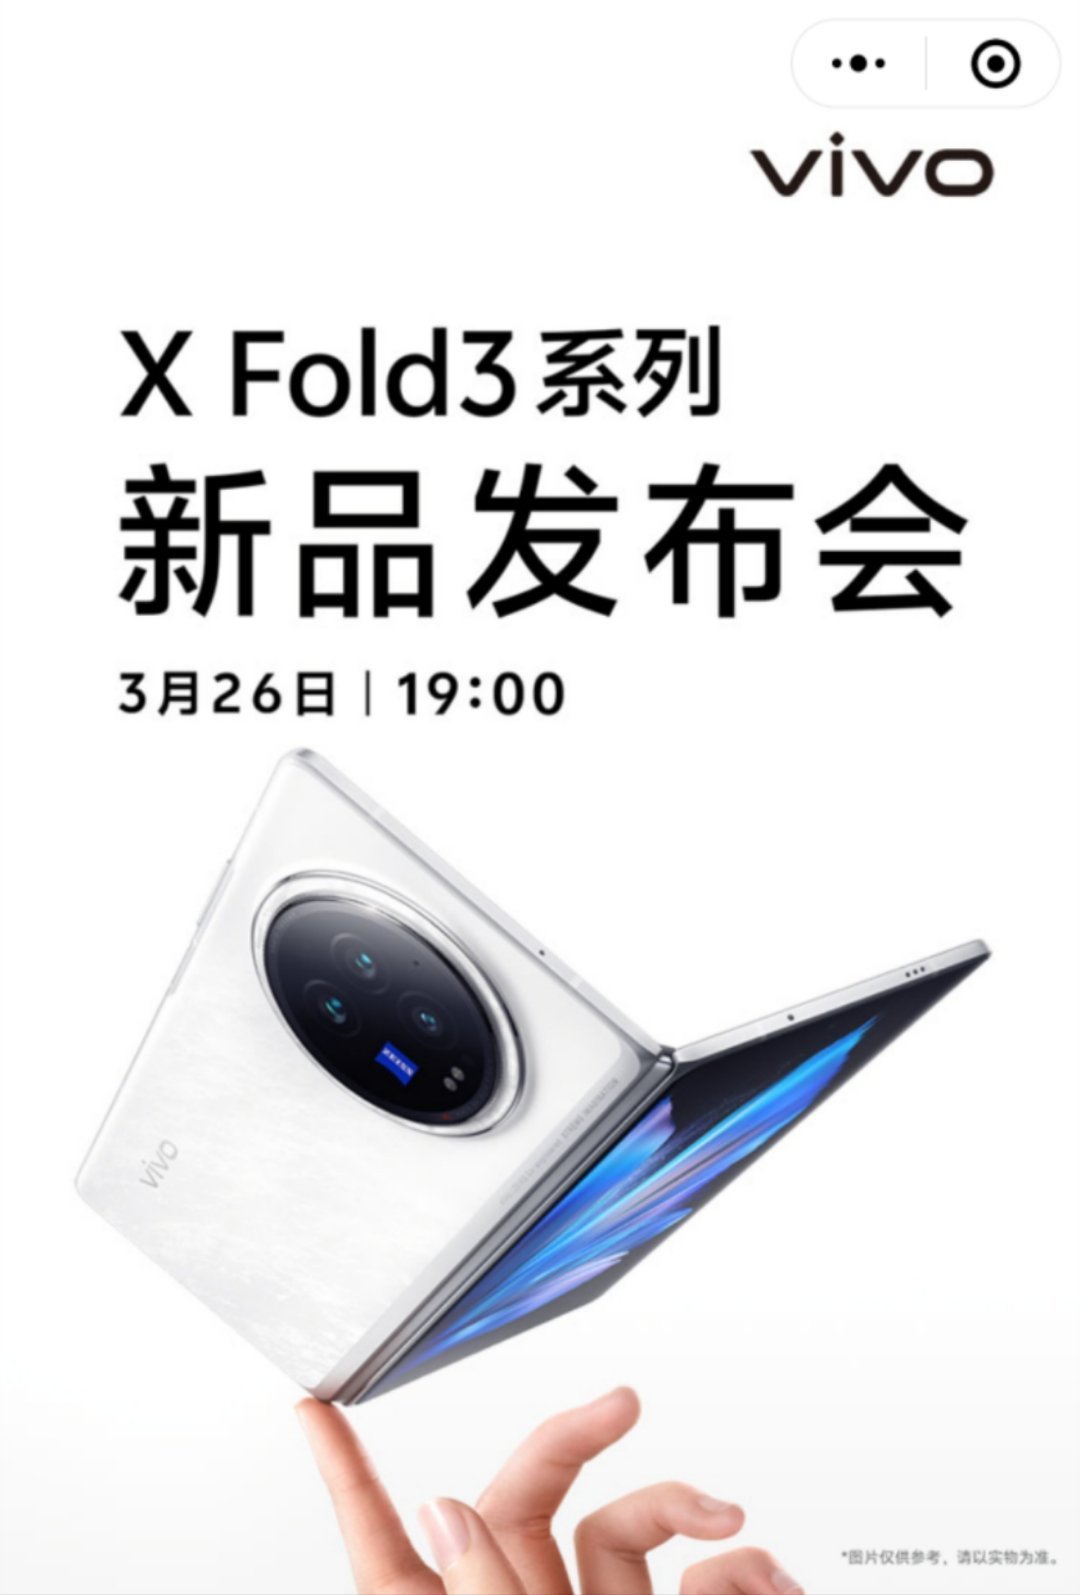 Vivo X Fold 3 Series Launch Date In China Seemingly Revealed Via Leaked Poster - News - News